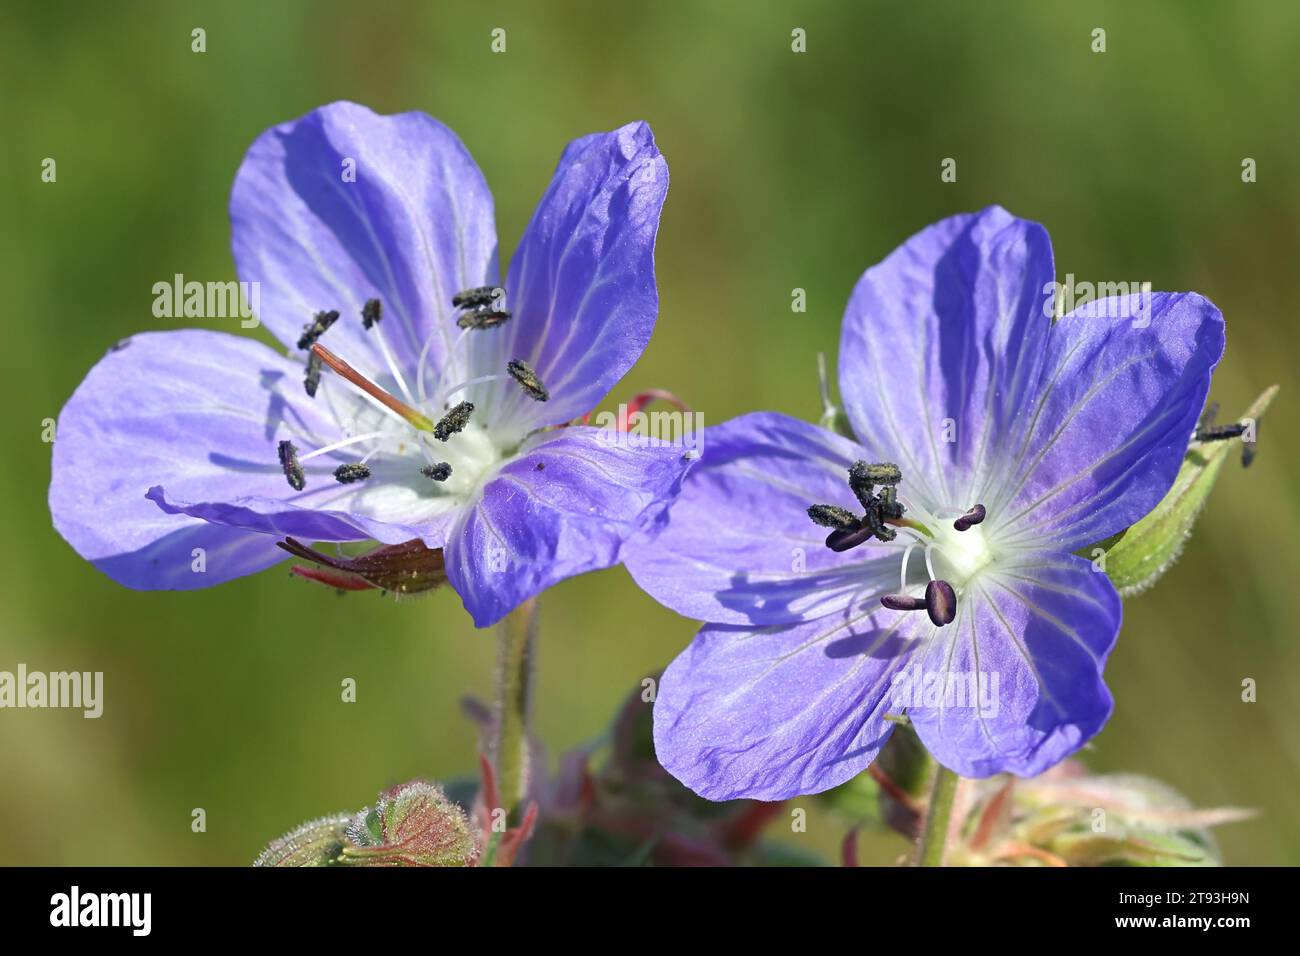 Meadow Cranesbill Geranium pratense, also known as Meadow crane’s-bill or Meadow geranium, wild flowering plant from Finland Stock Photo